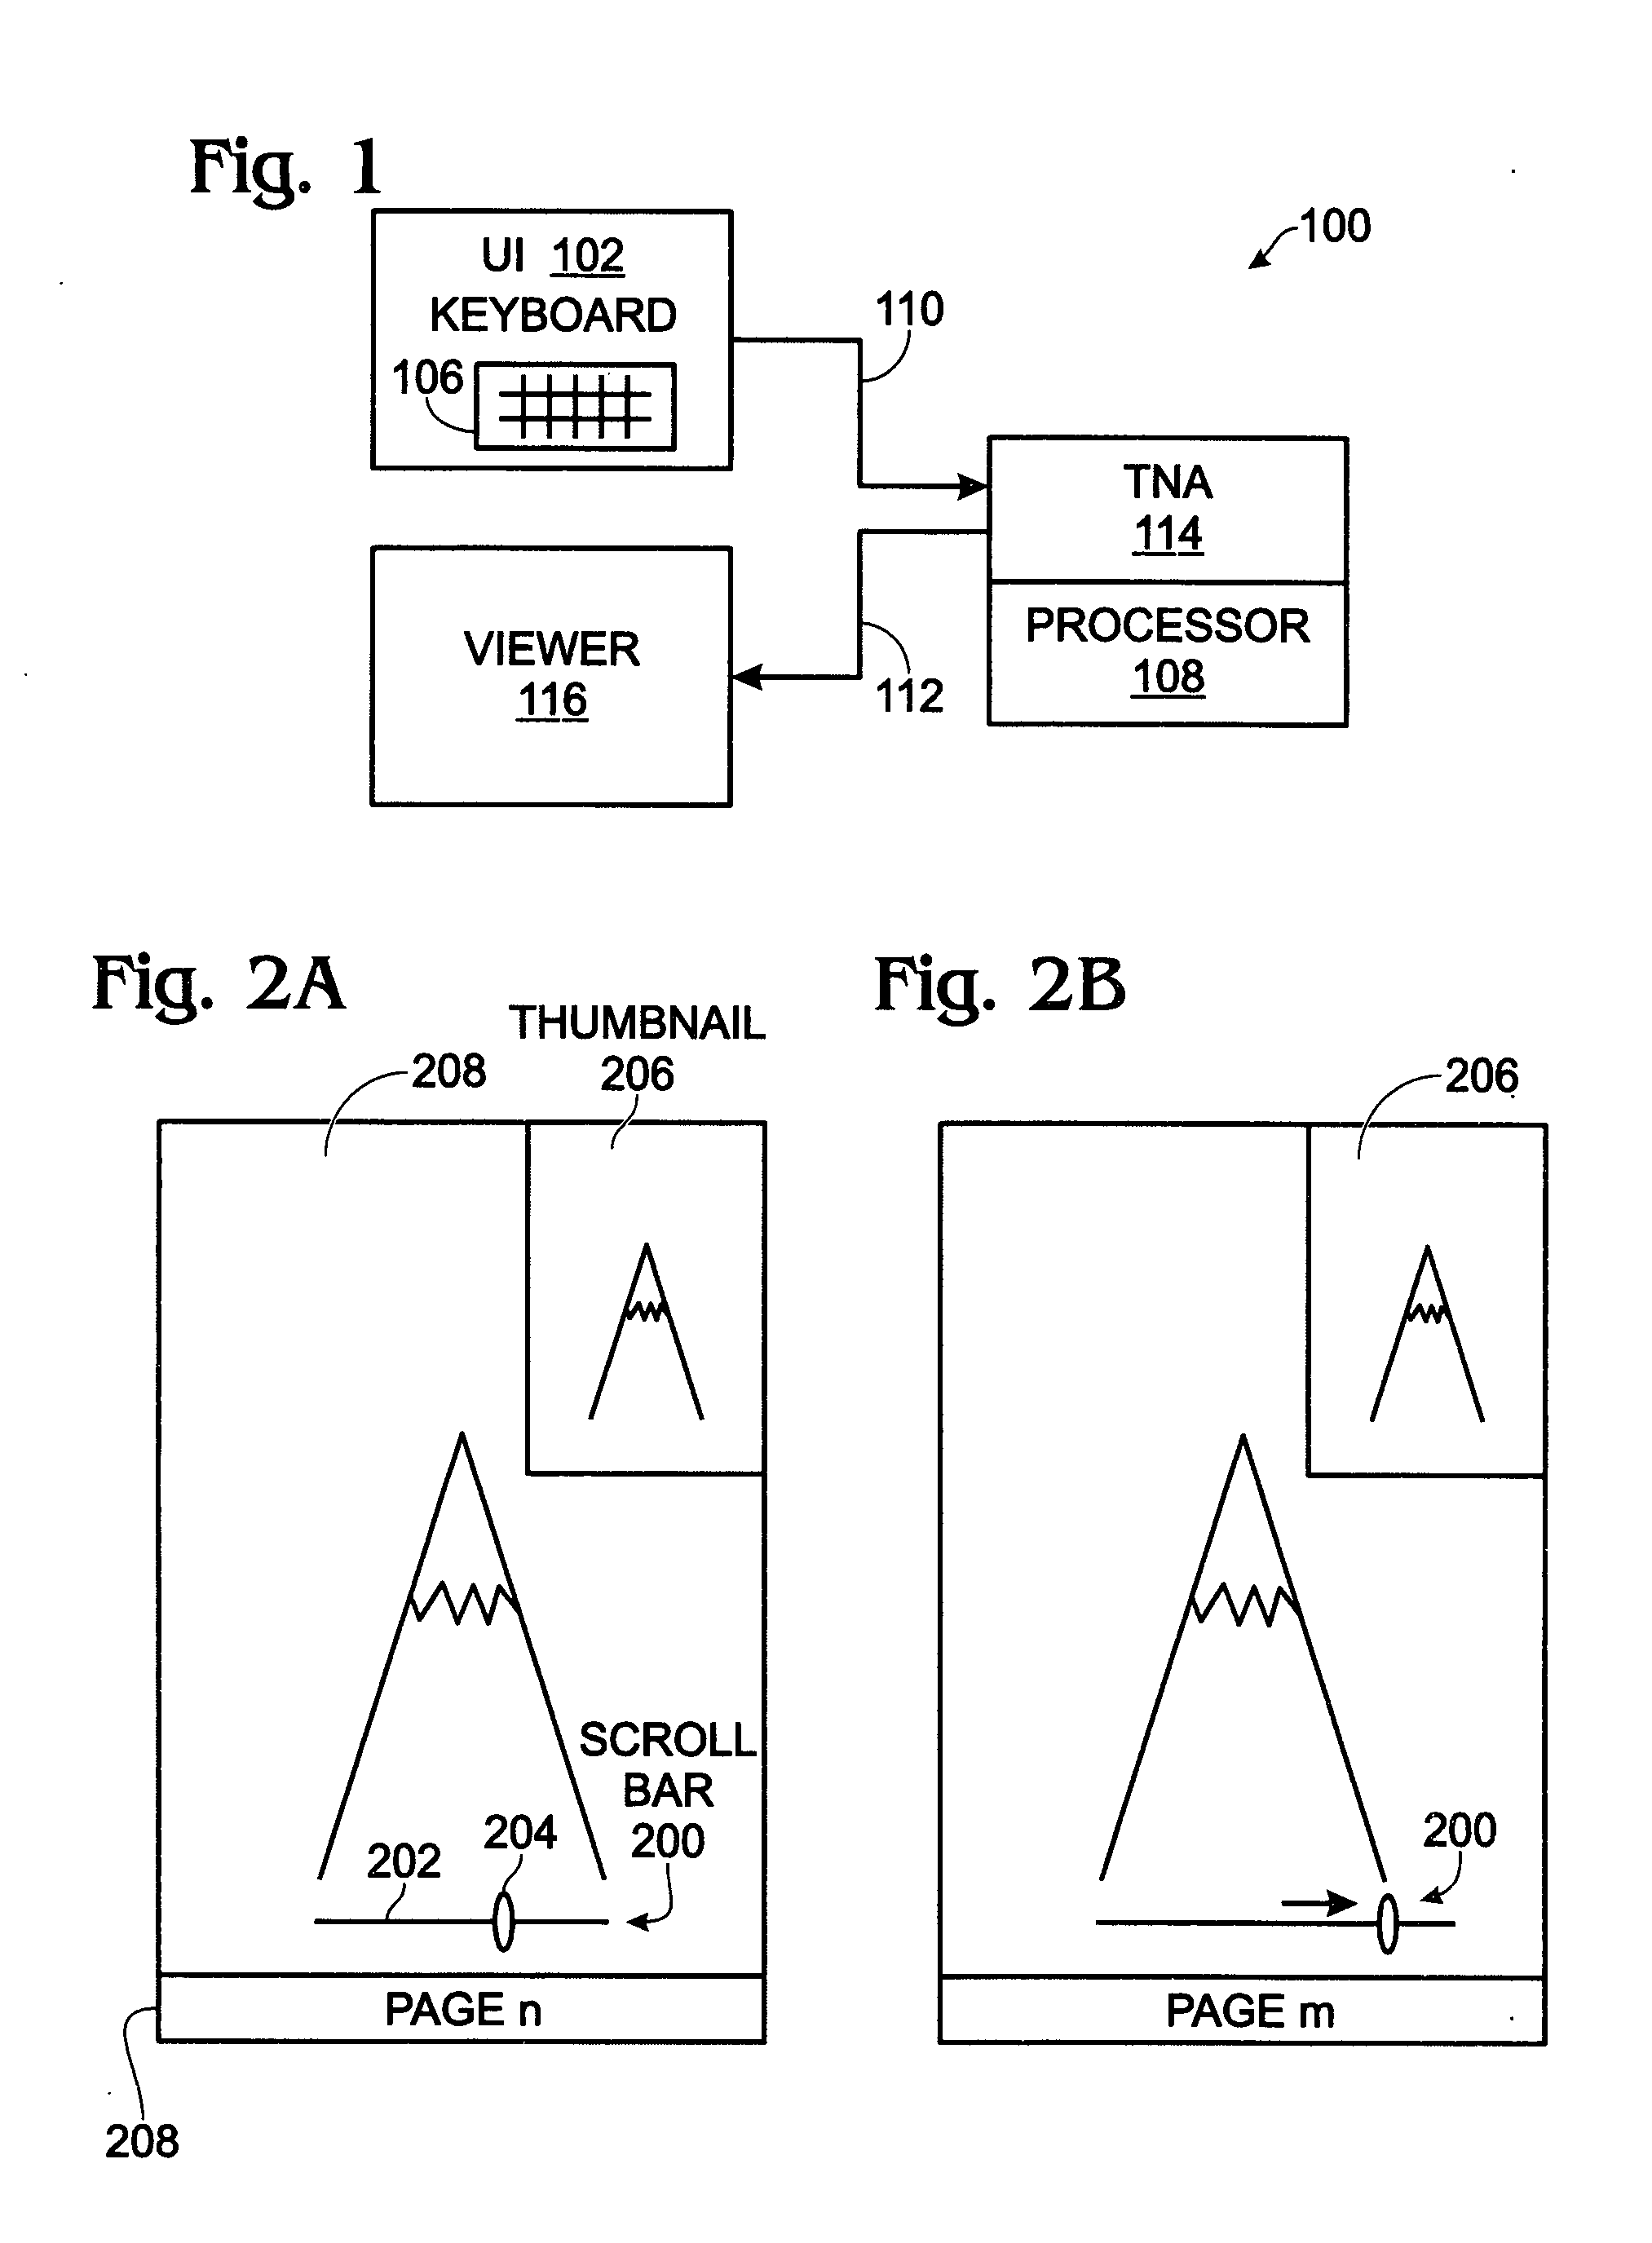 System and method for selecting thumbnails in a multi-page document